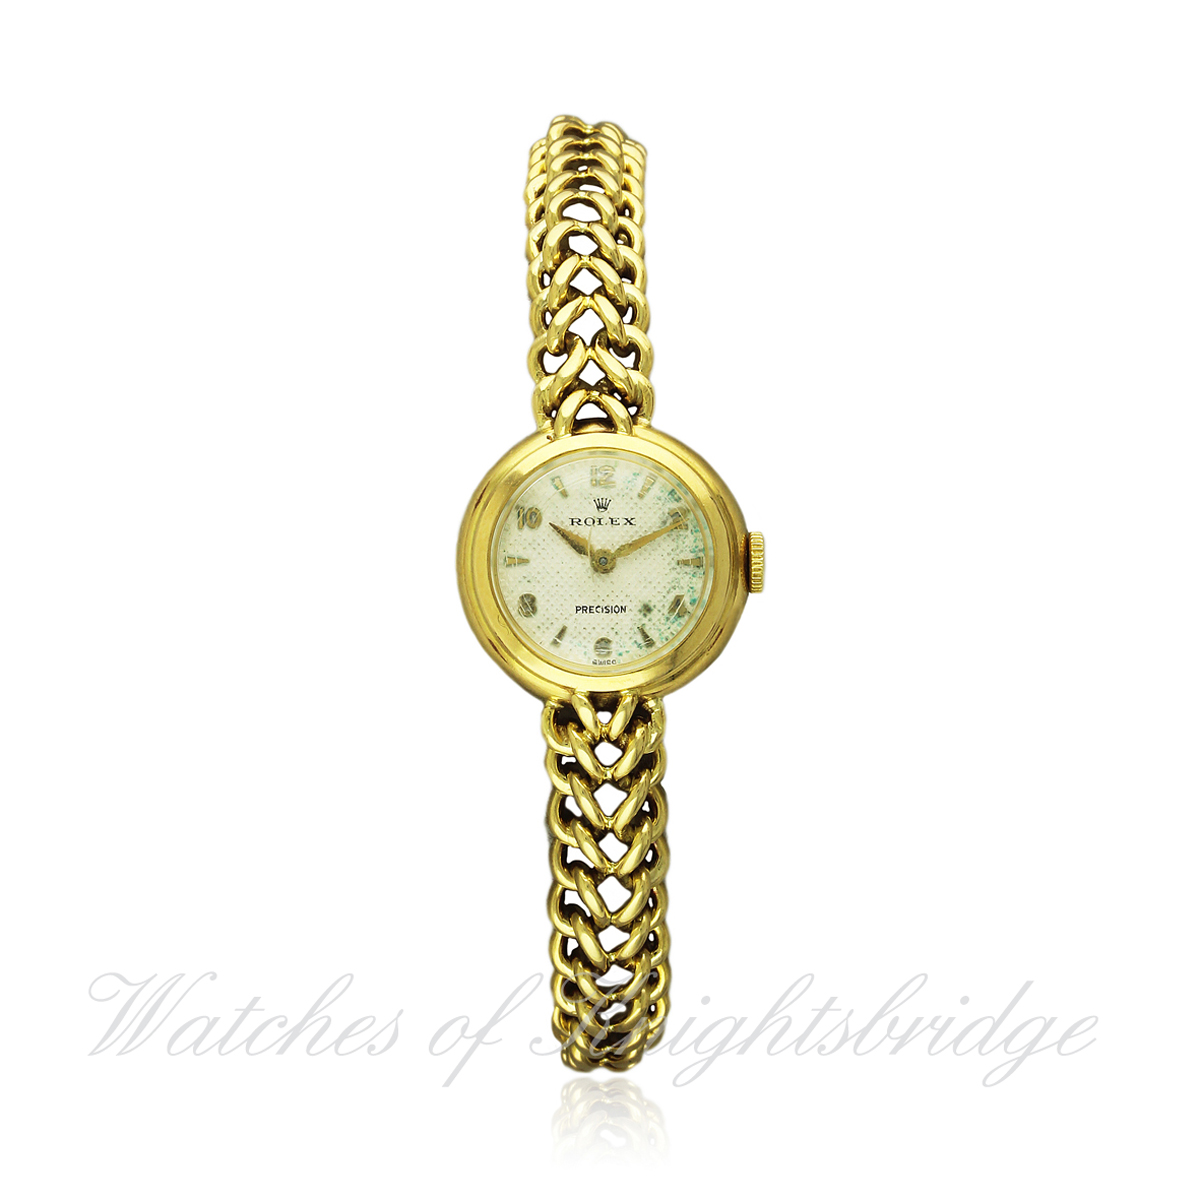 A LADIES 18K SOLID GOLD ROLEX PRECISION BRACELET WATCH CIRCA 1950s D: Silver "honeycomb" dial with